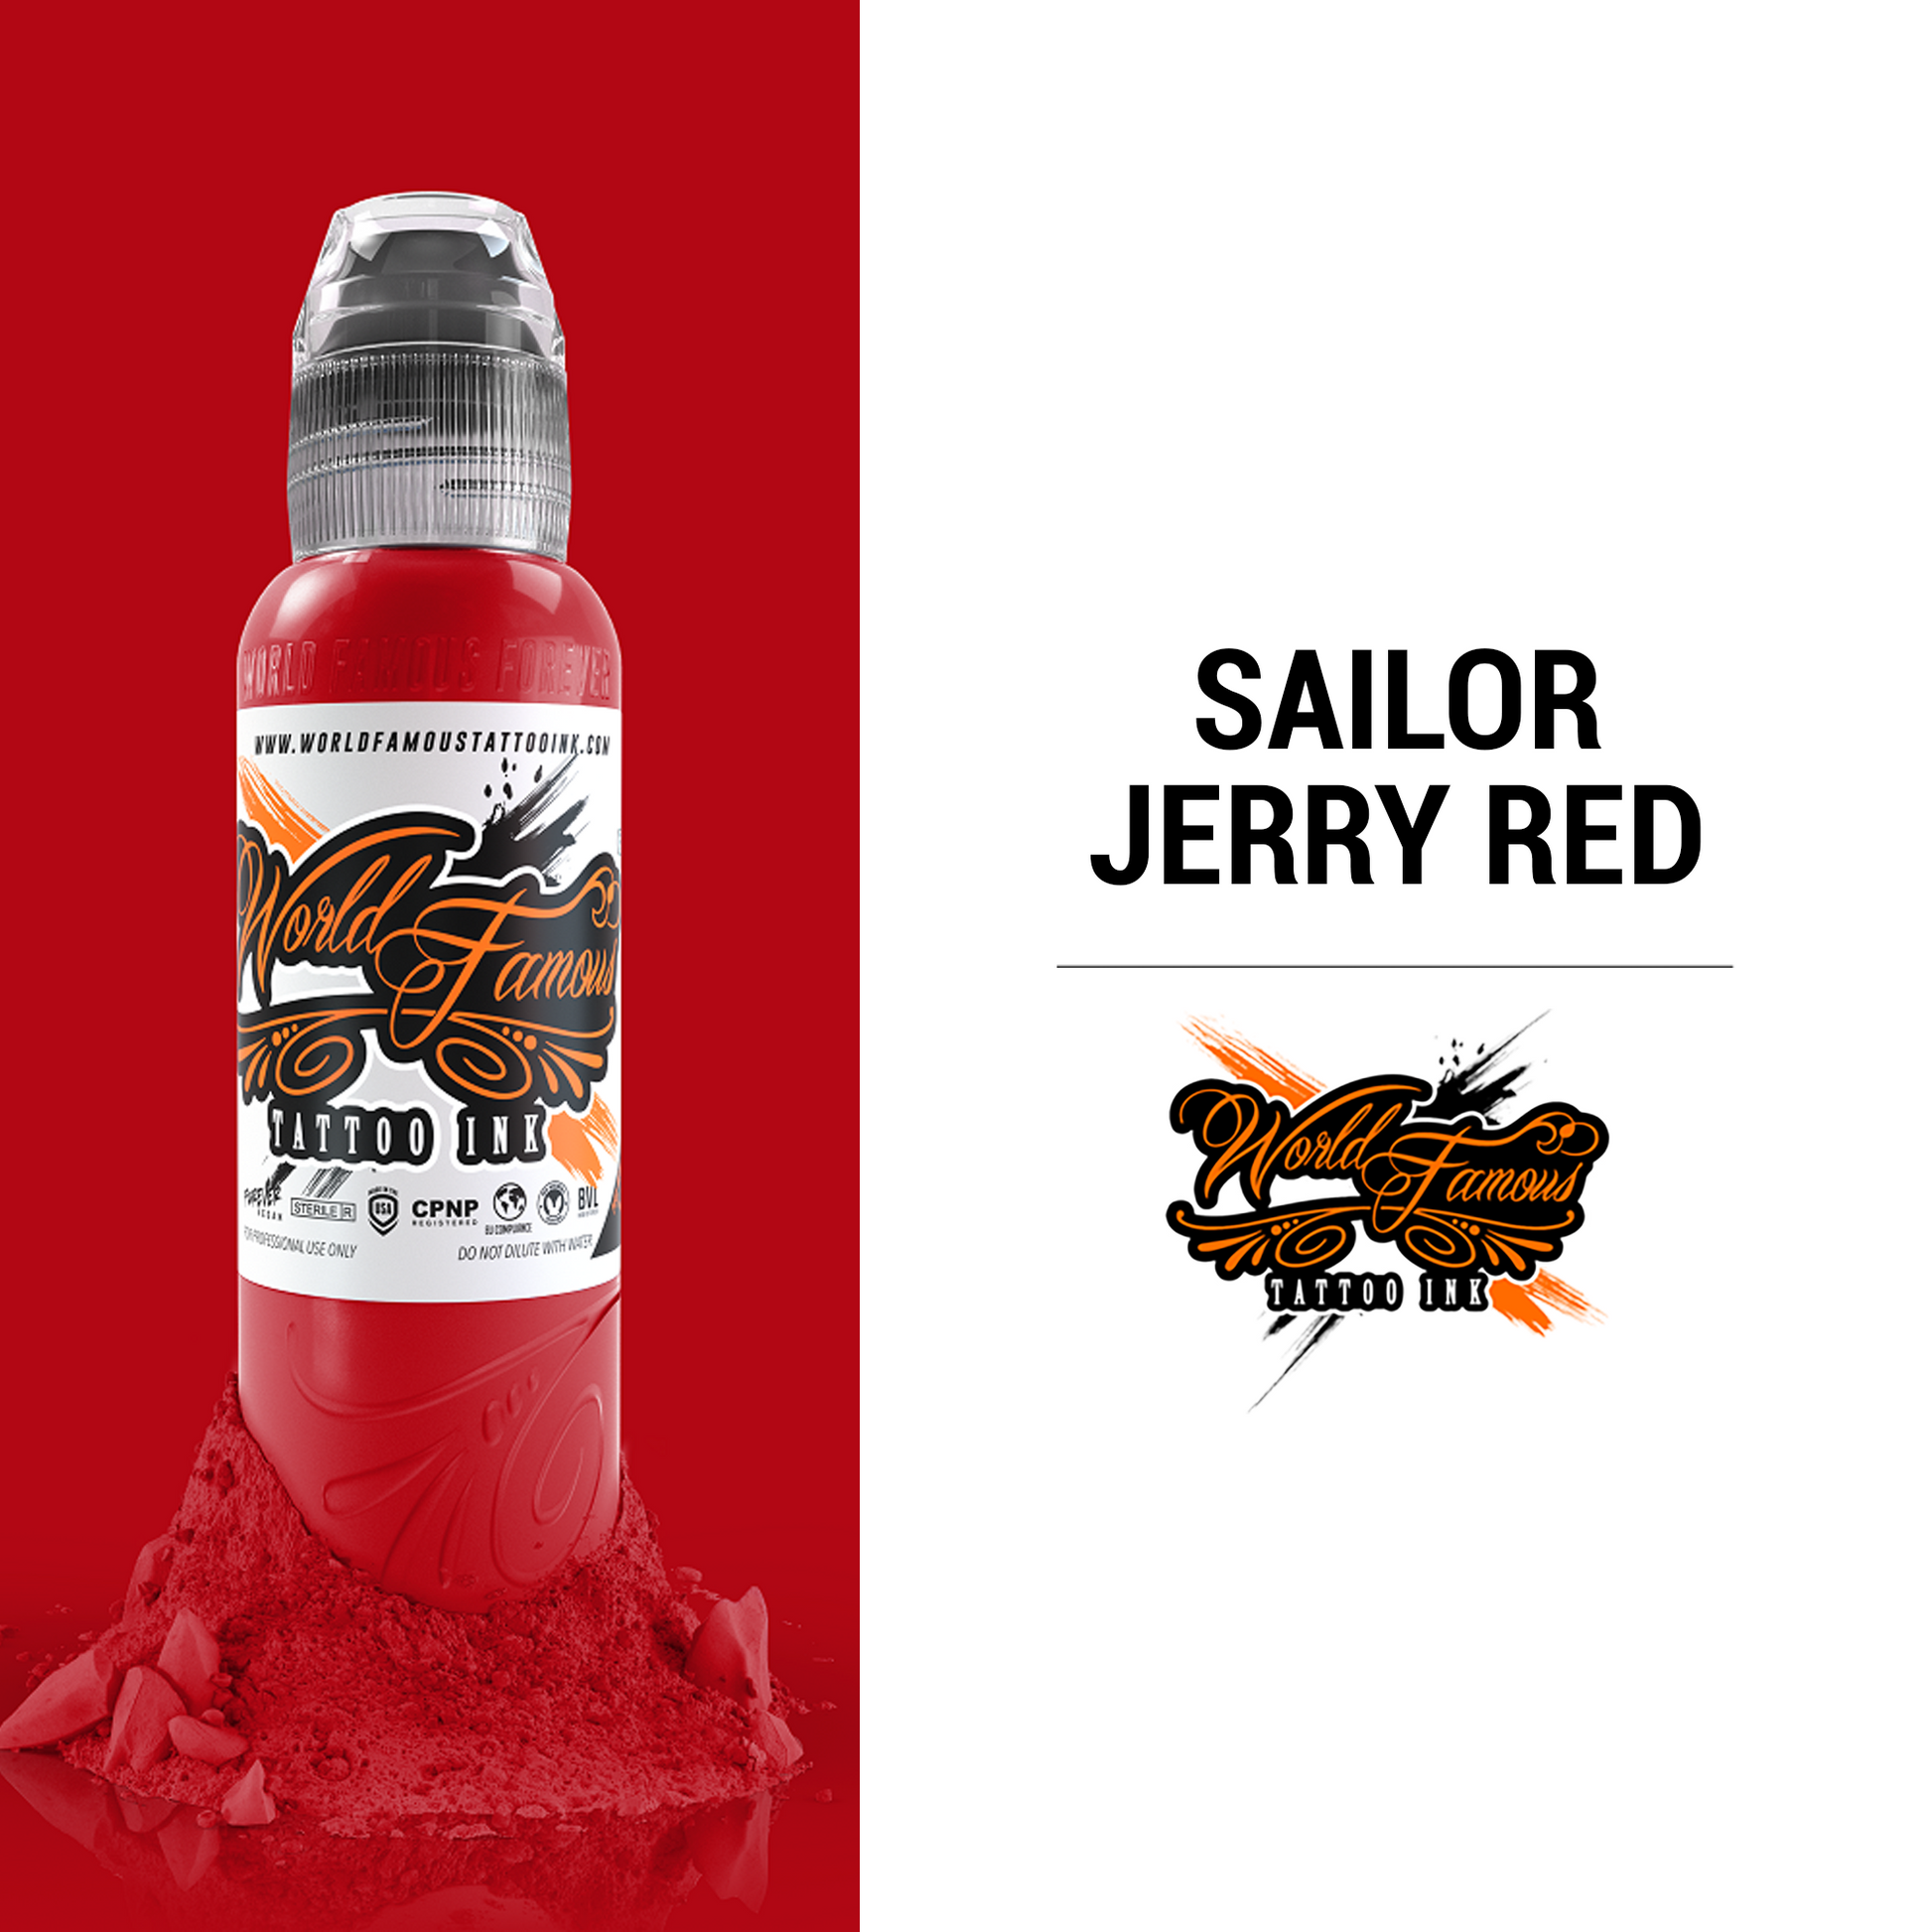 World Famous Tattoo Ink - Sailor Jerry Red Tattoo Ink - Professional Tattoo  Ink & Tattoo Supplies - Skin-Safe Permanent Tattooing in Bold Shades 